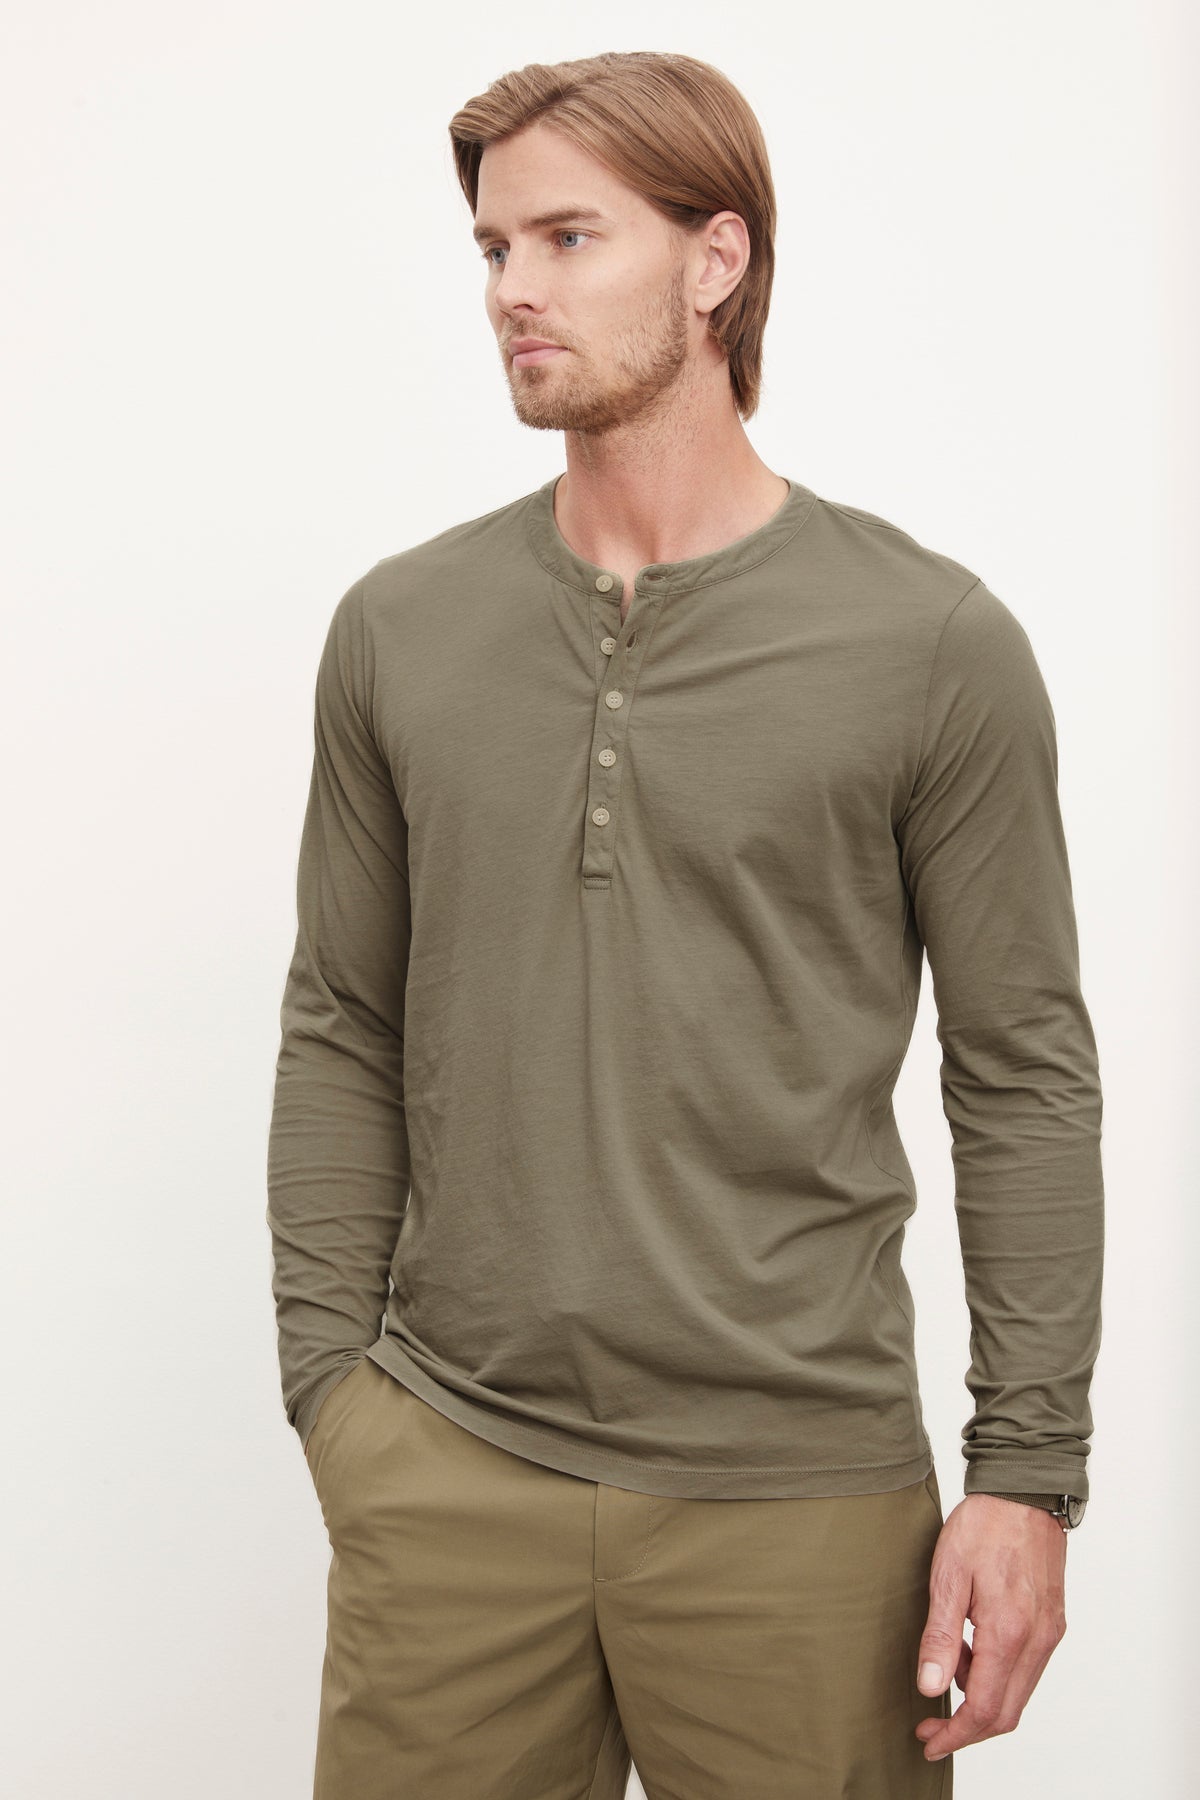 A man with medium-length hair stands wearing the Velvet by Graham & Spencer ALVARO HENLEY, a lightweight, long-sleeve olive green shirt with a buttoned henley neckline, and khaki pants.-36009056403649